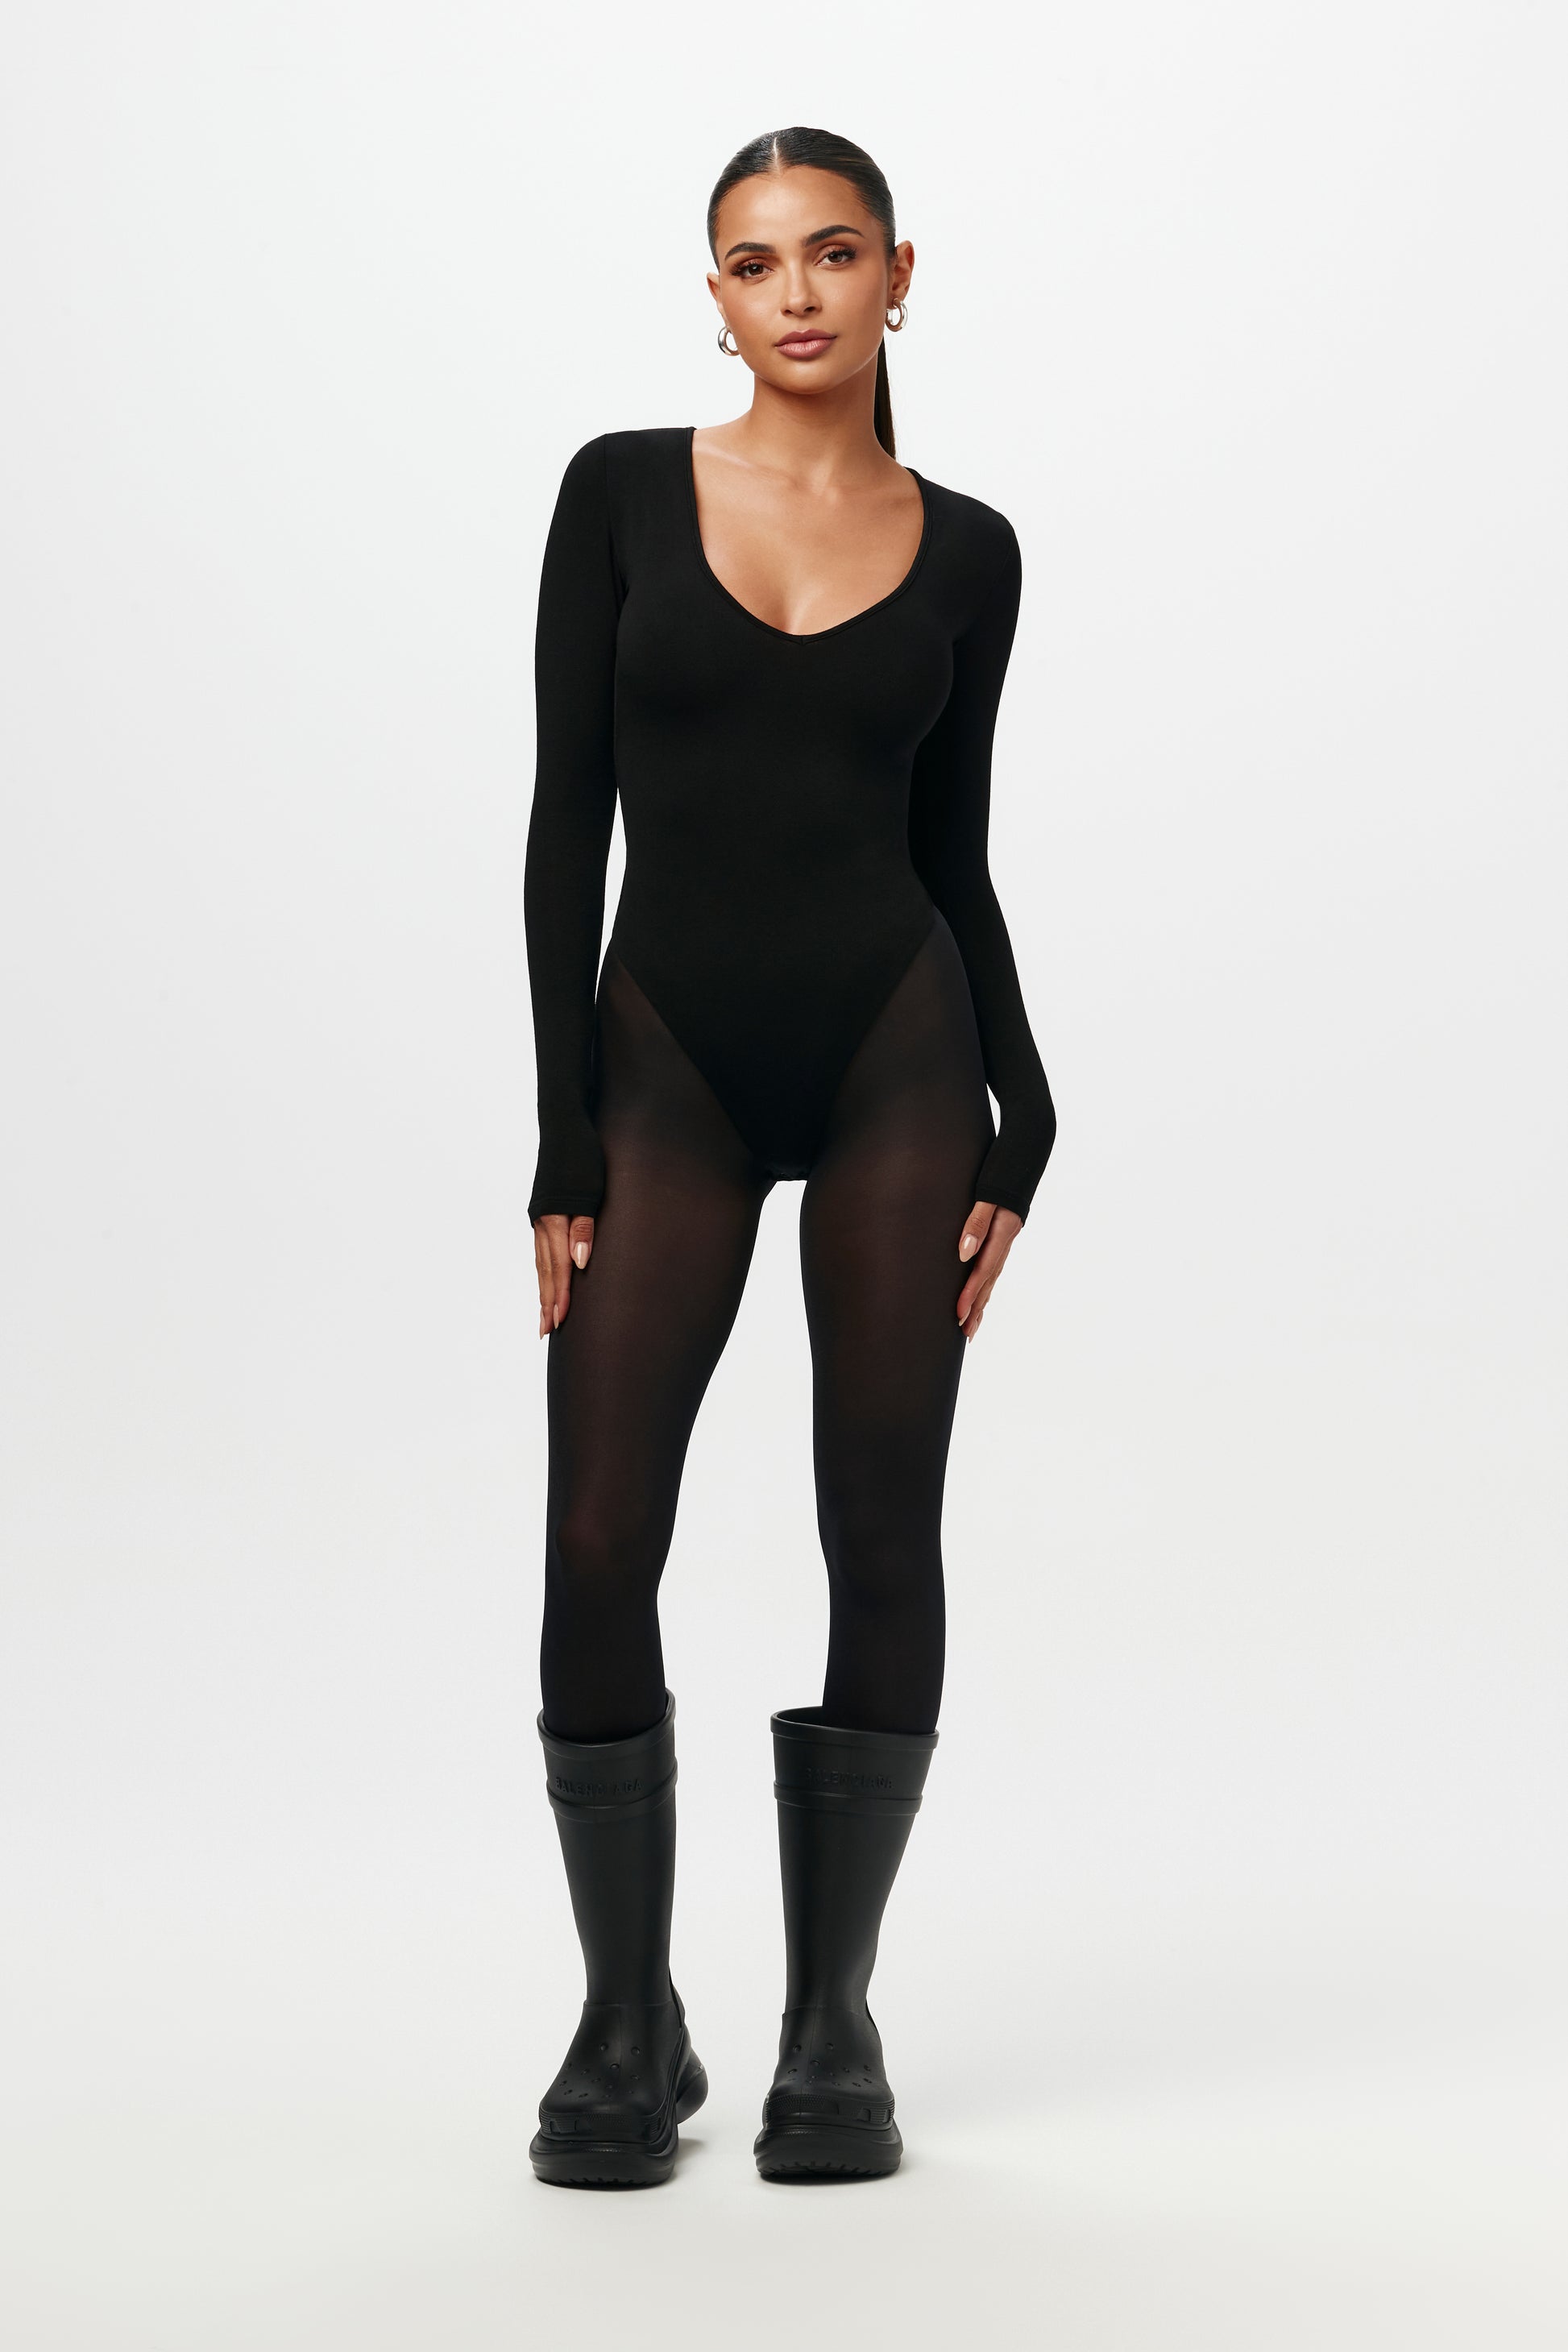 EXCLUSIVE: 40% OFF Jumpsuits + Bodysuits - Naked Wardrobe